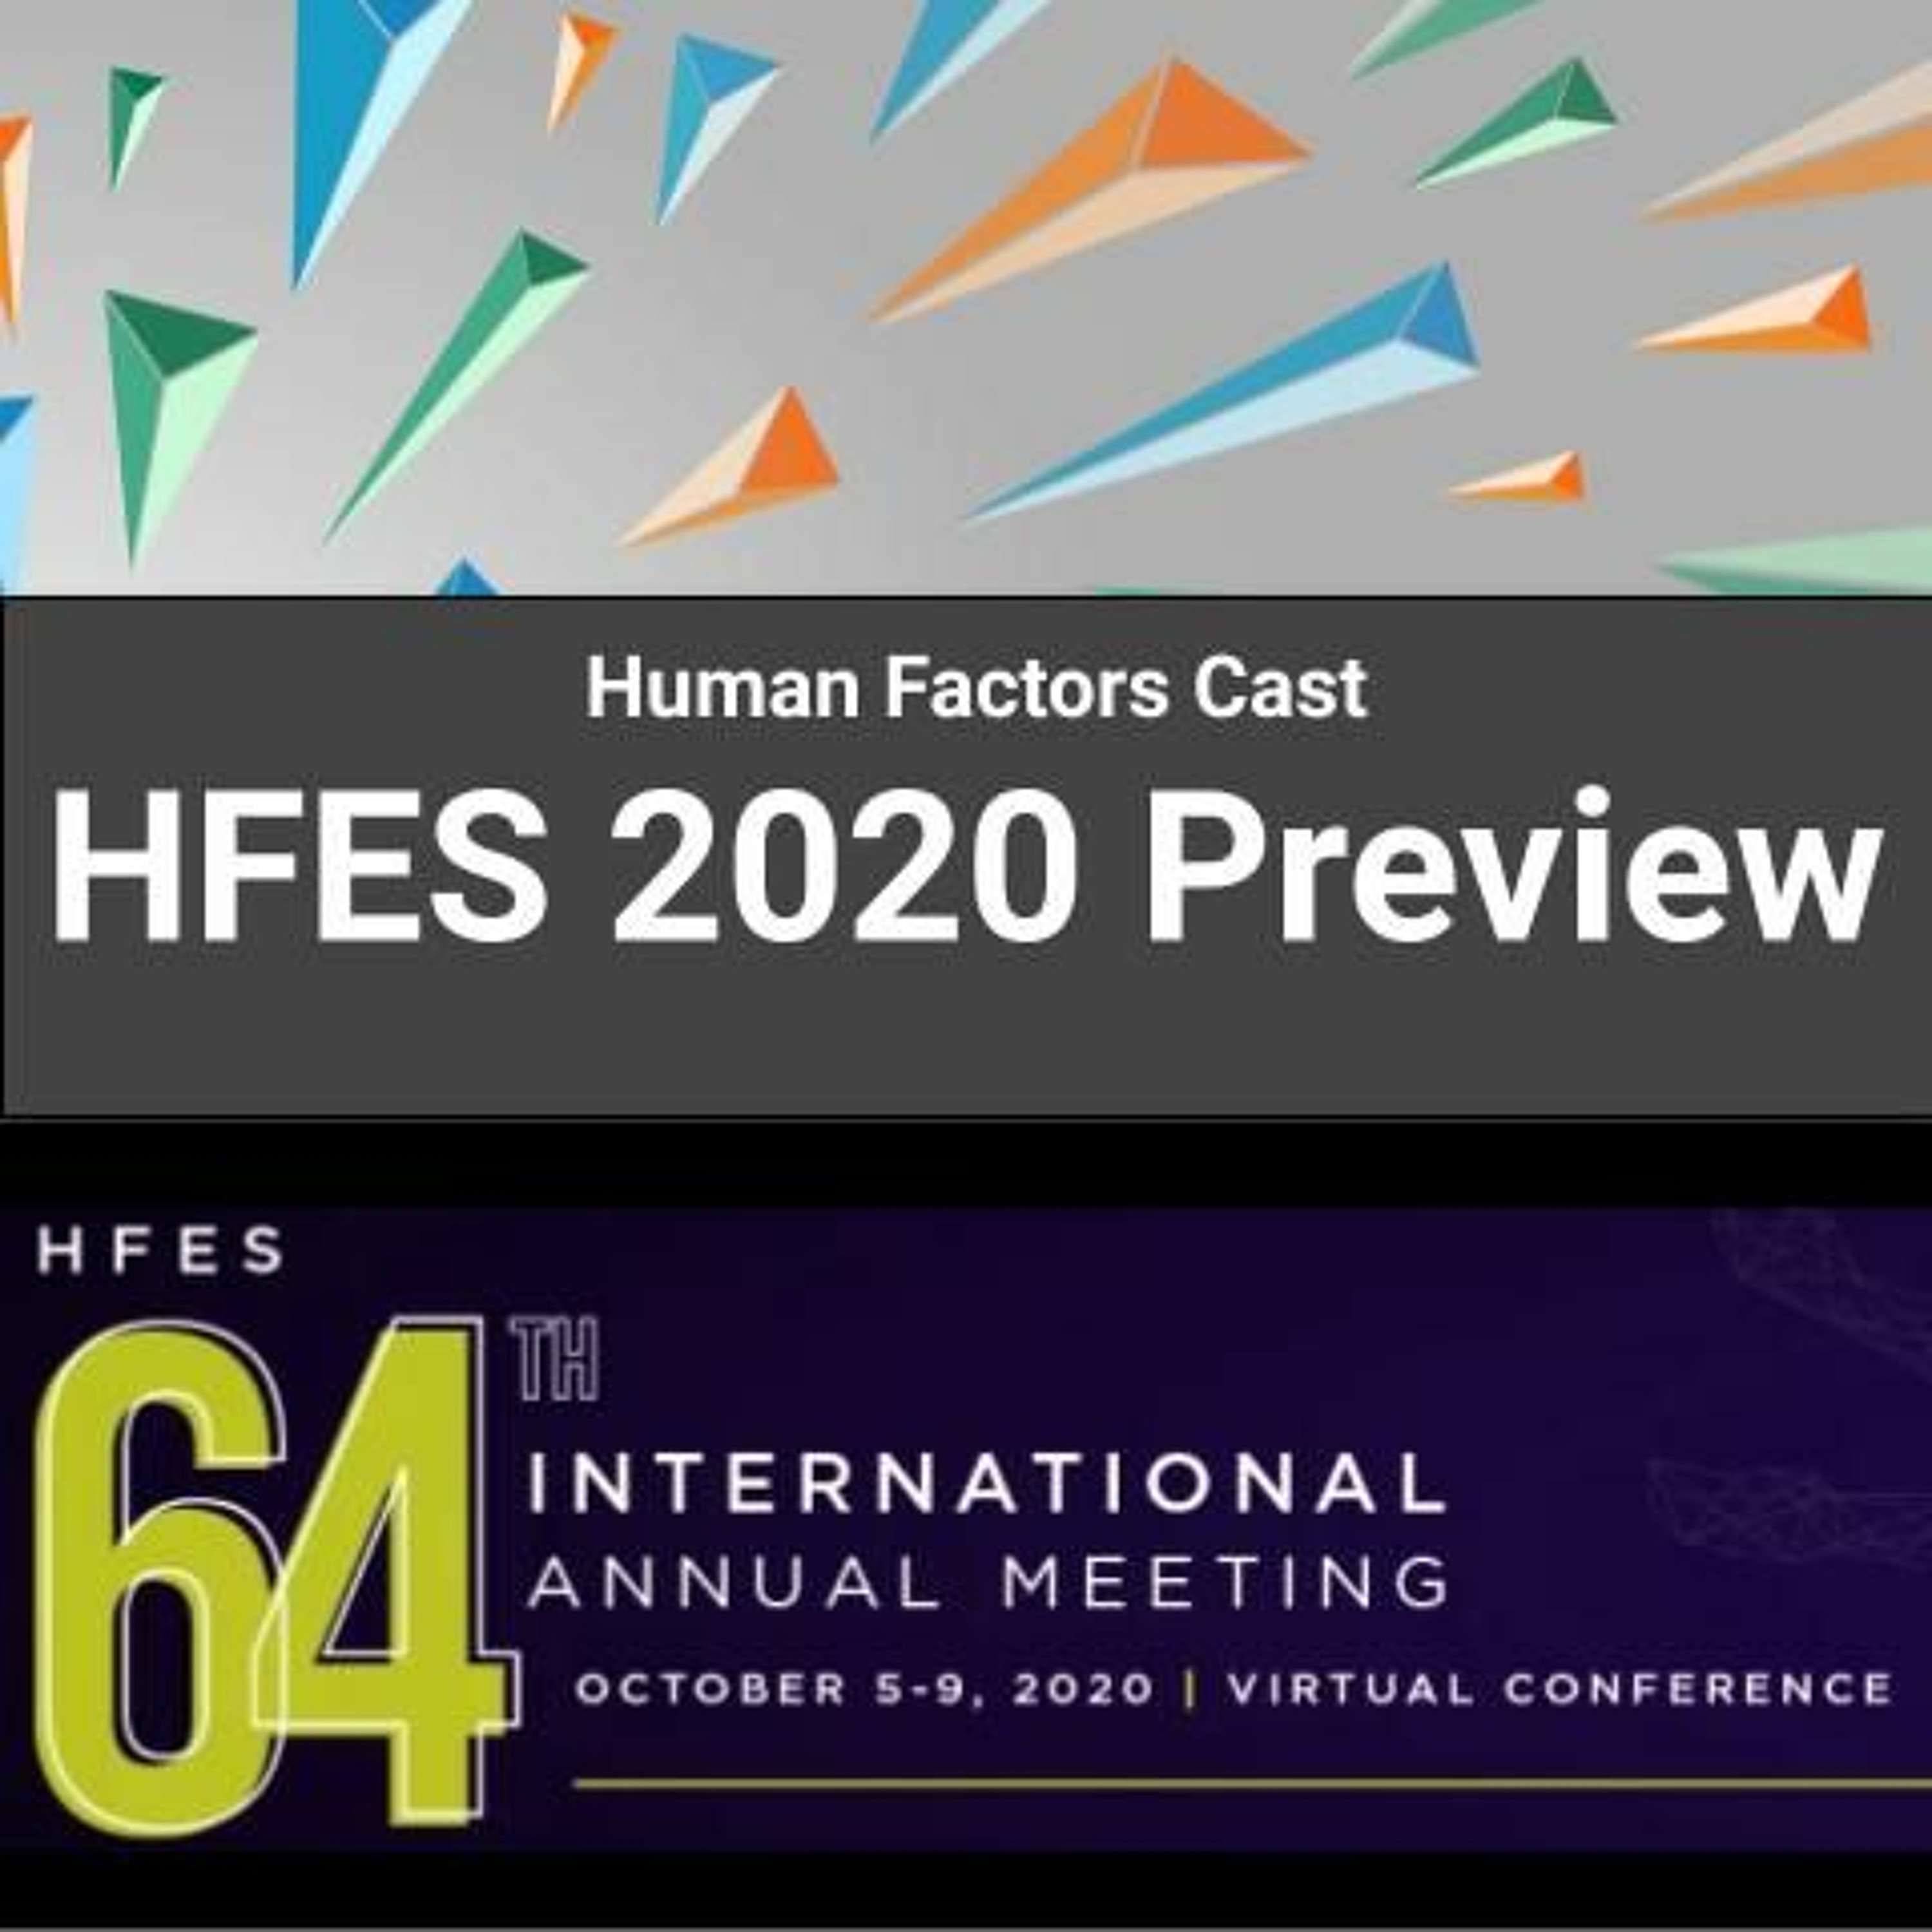 #HFES2020 Preview Image